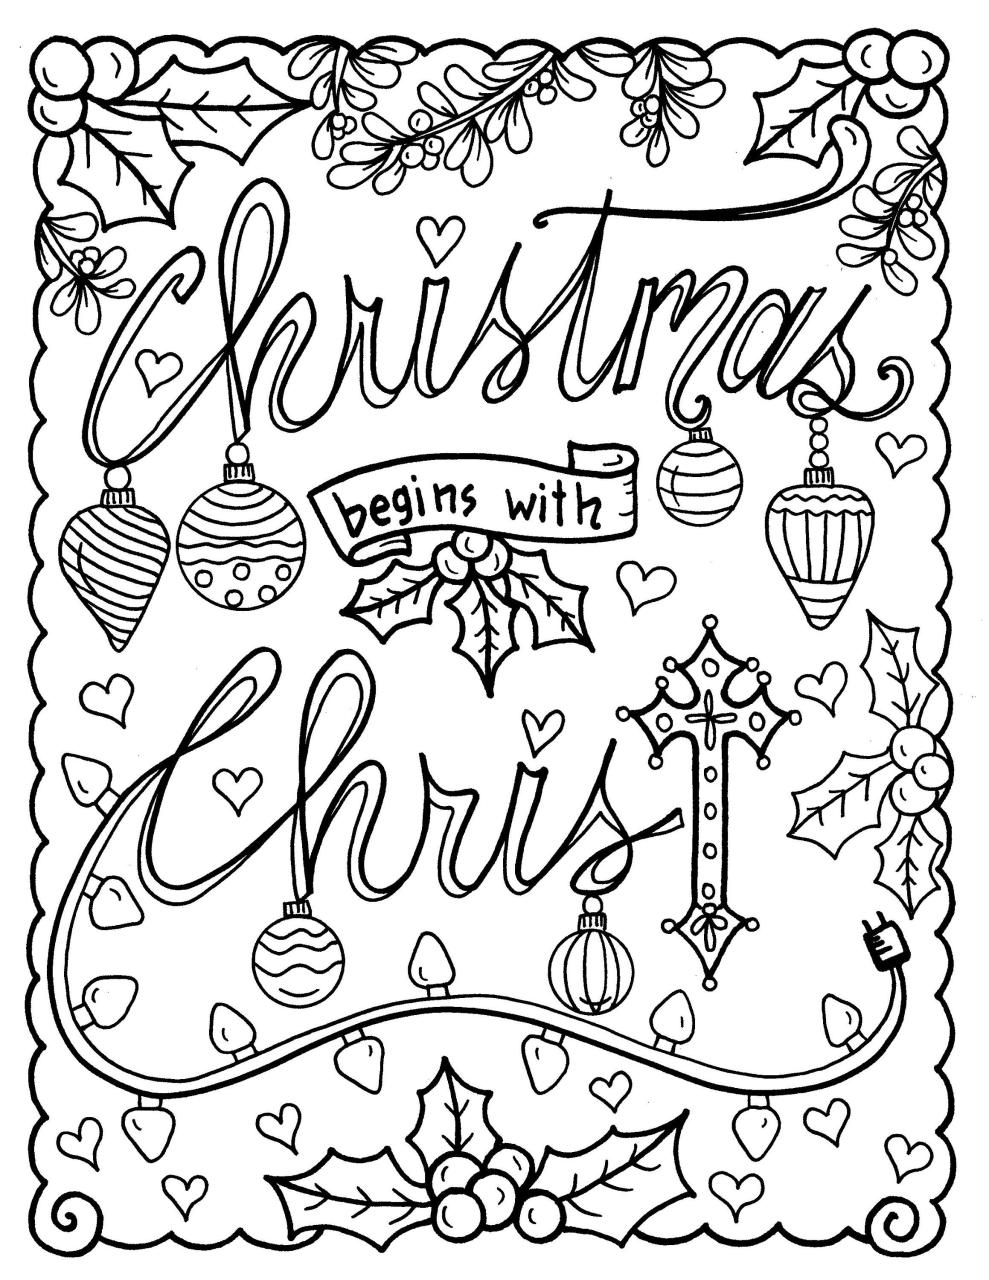 Free Christmas Coloring Pages Christian